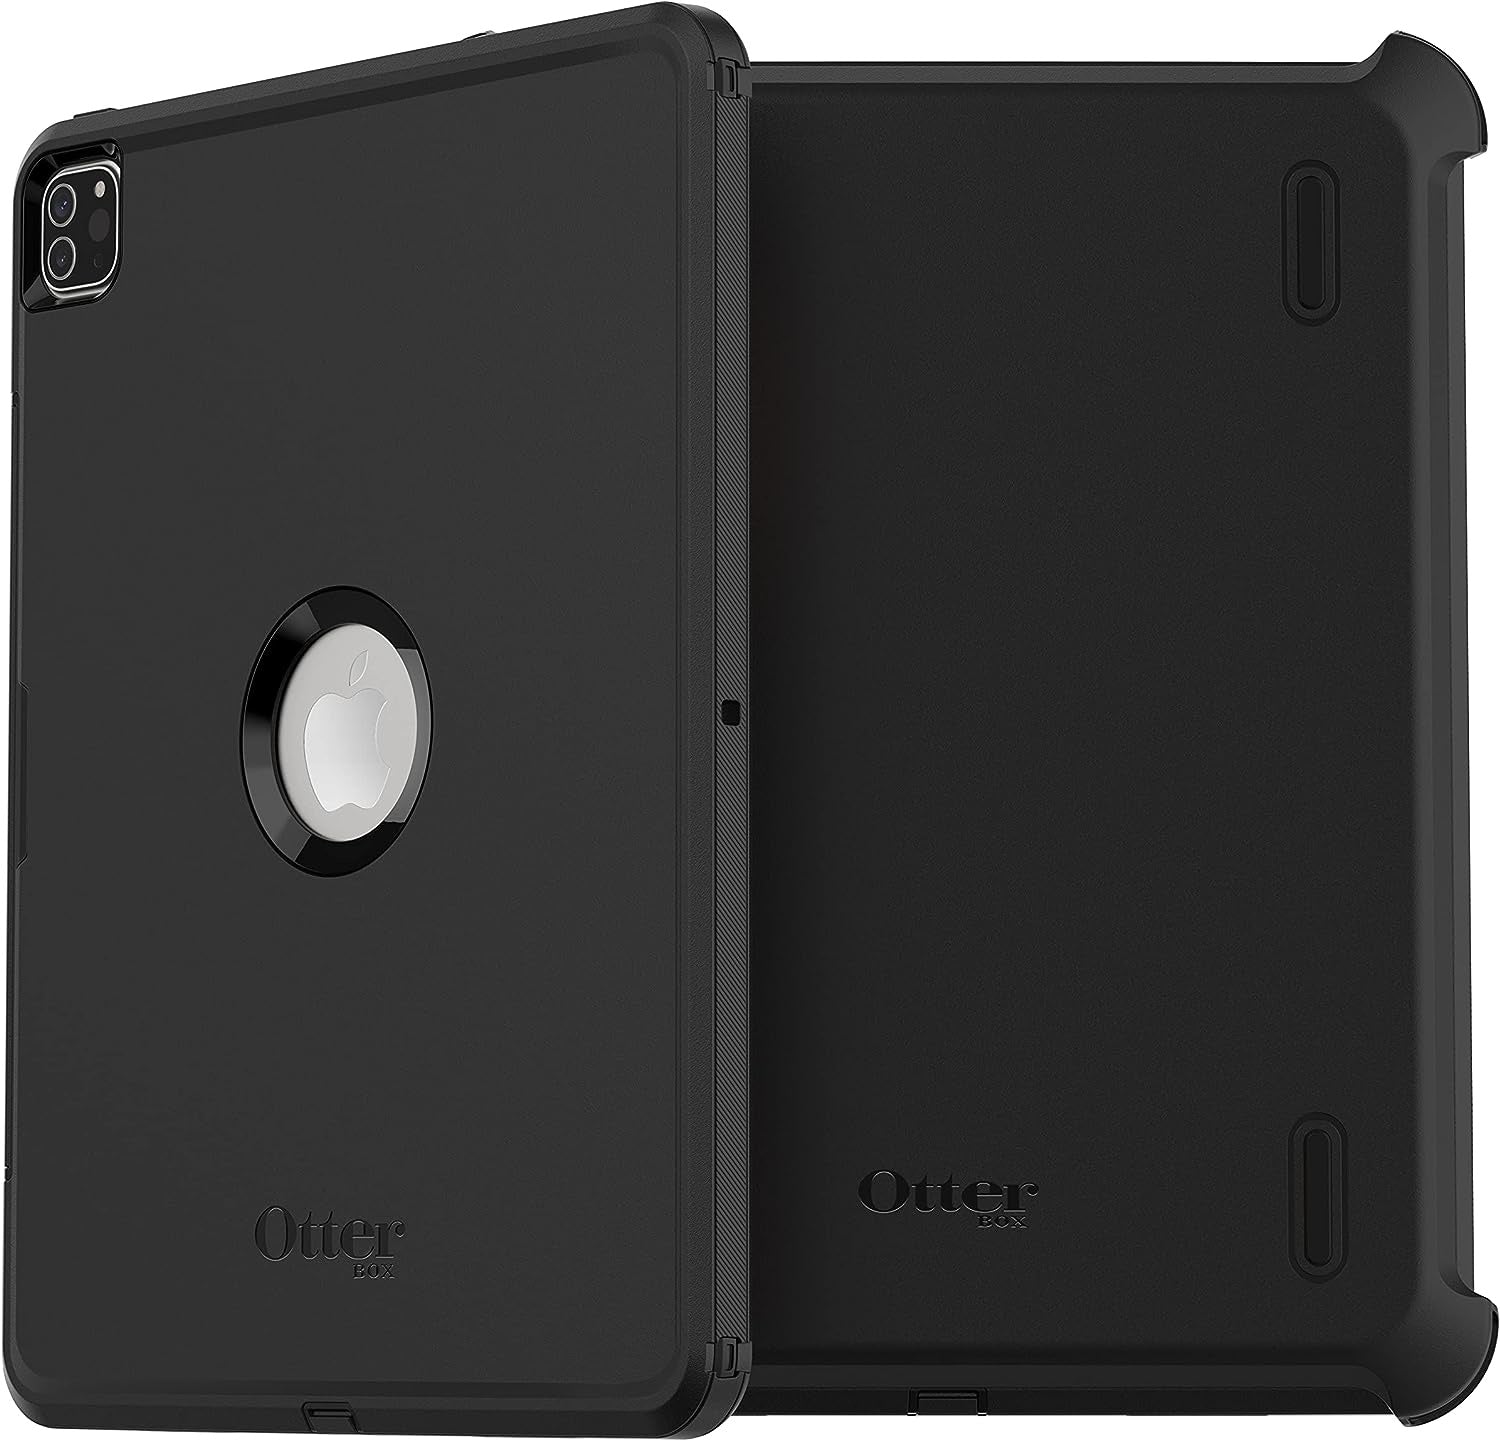 OtterBox Defender Series Case for iPad Pro 12.9-inch (6th, 5th, 4th & 3rd Gen) - Single Unit Ships in Polybag, Ideal for Business Customers - Black